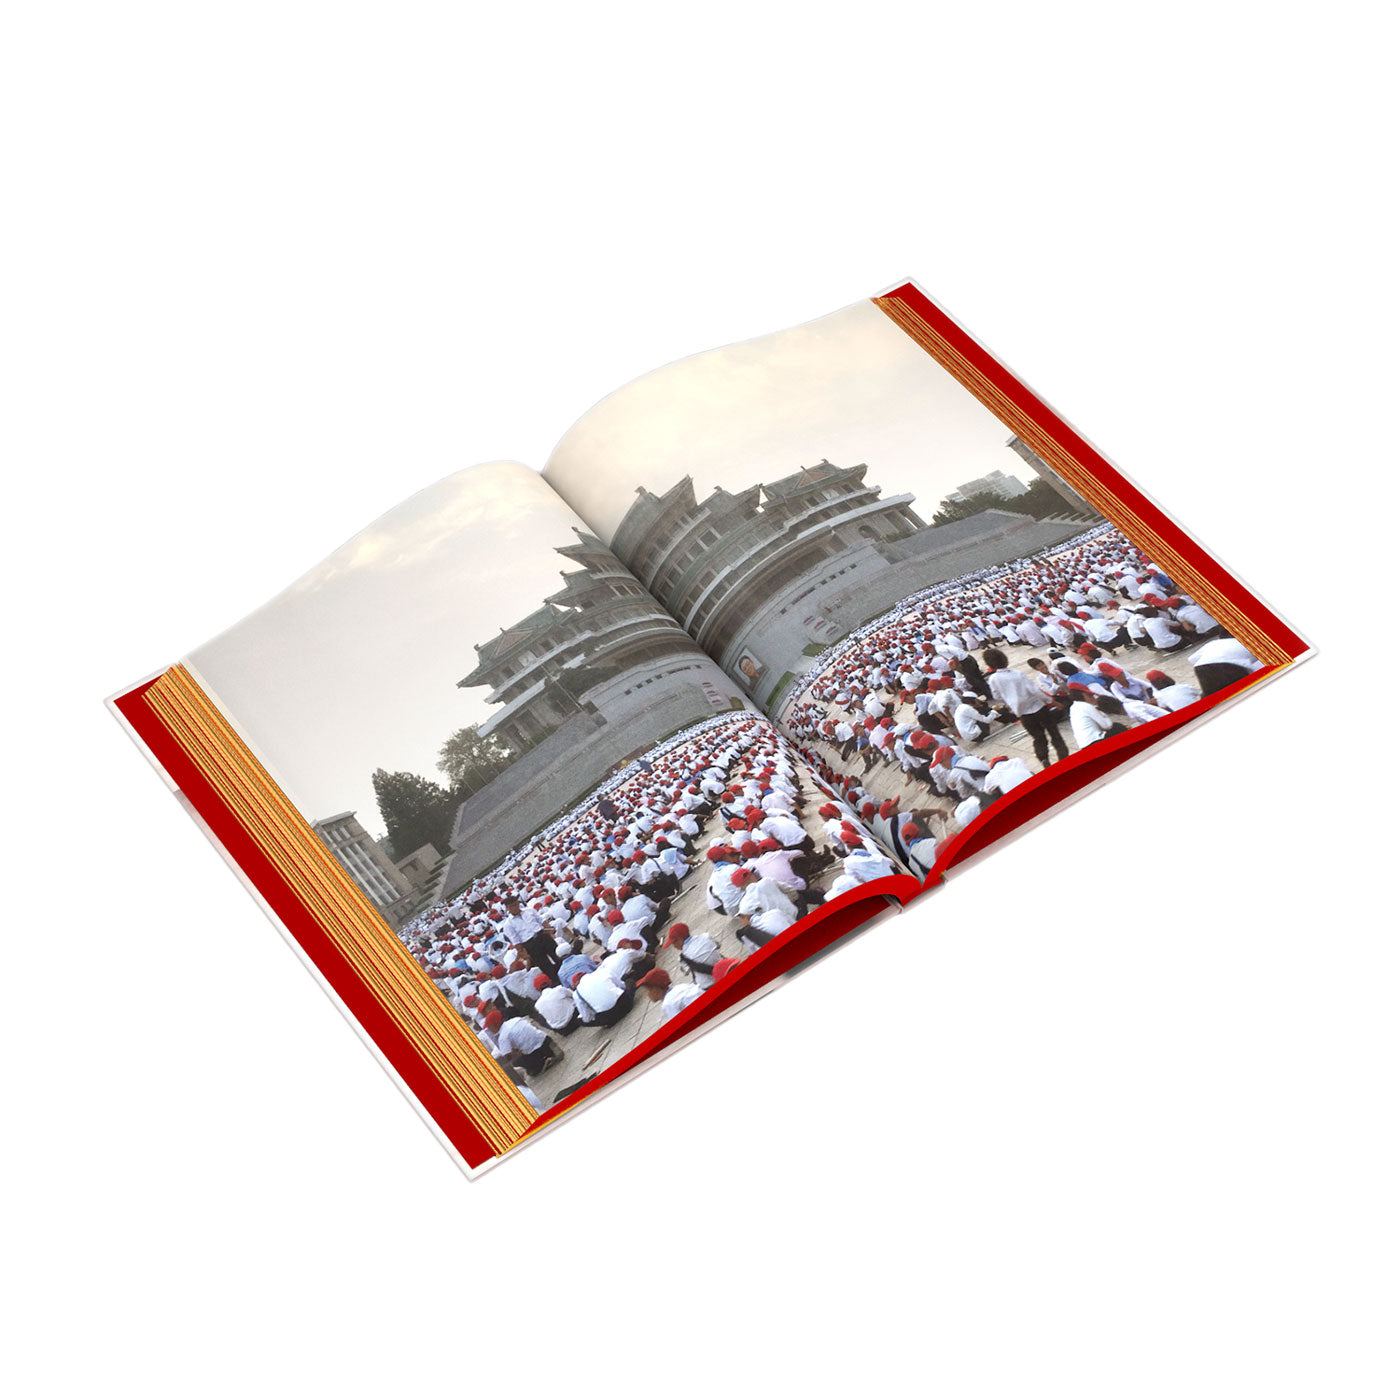 LIBERATION DAYS, Laibach and North Korea - Book